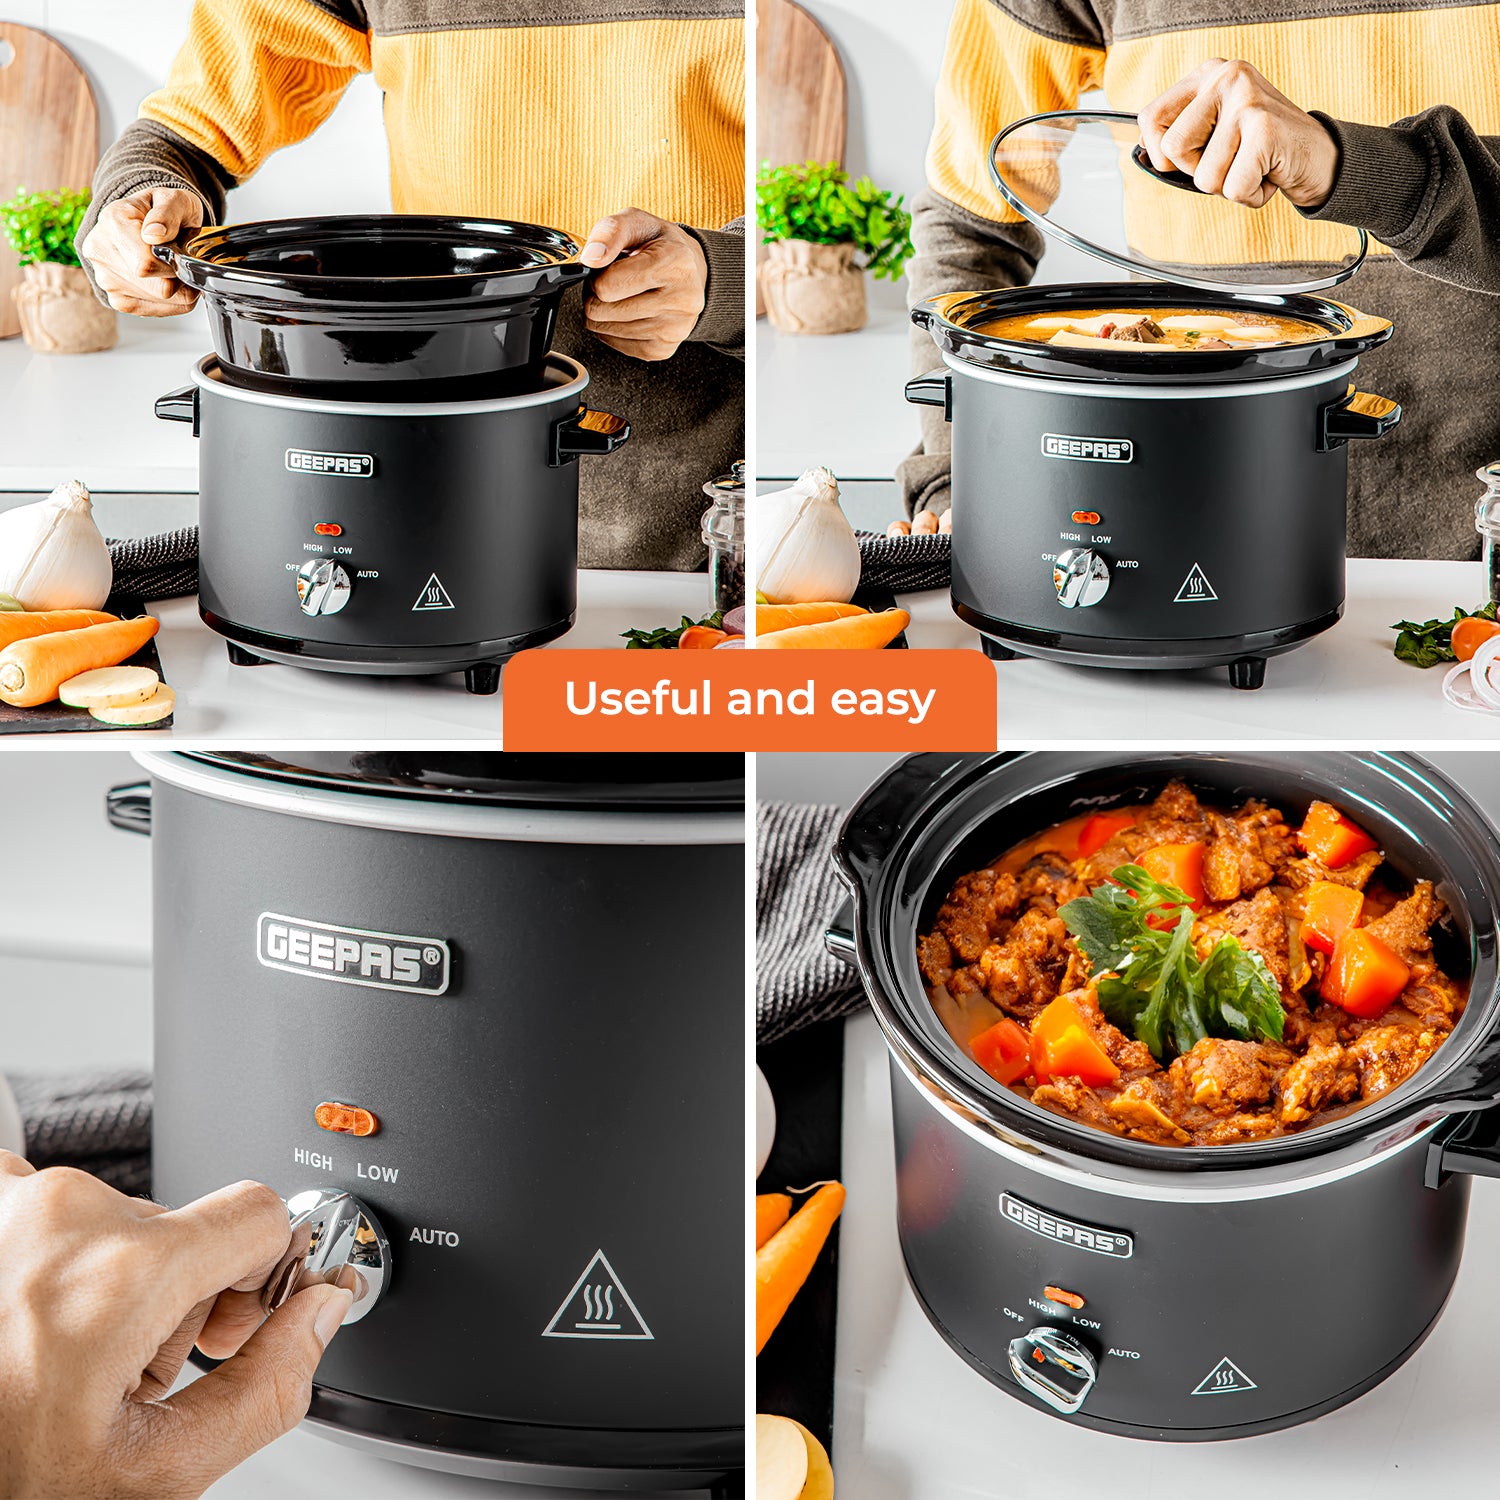 2.5L Black Electric Slow Cooker With Removable Bowl